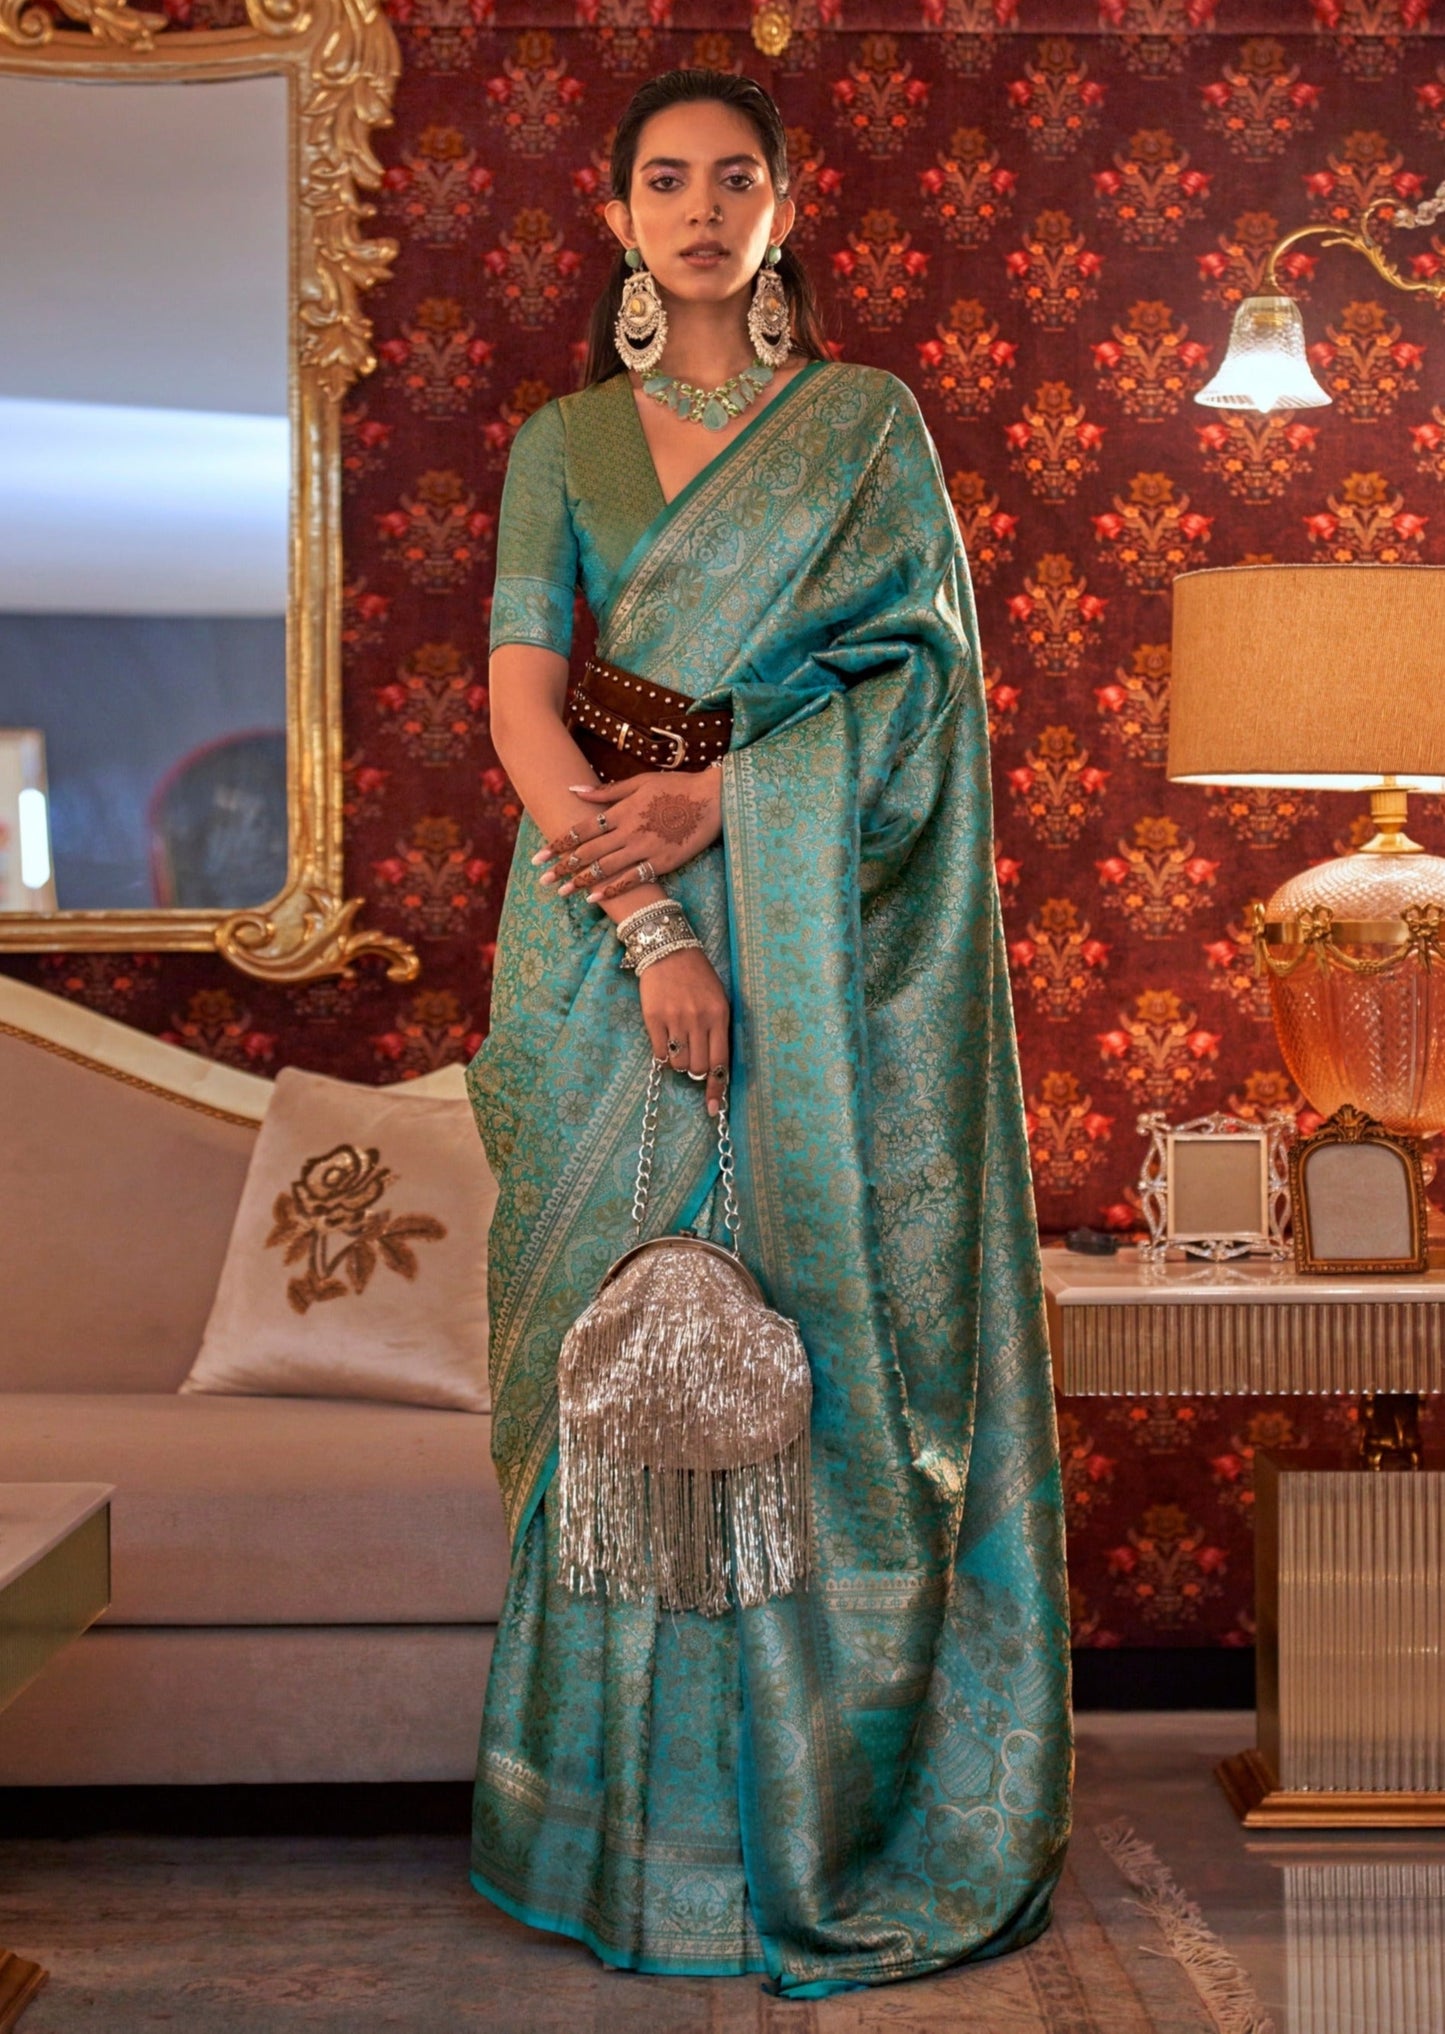 woman standing in Banarasi Silk blue Handloom Bridal Saree in front of a white sofa holding silver purse in right hand